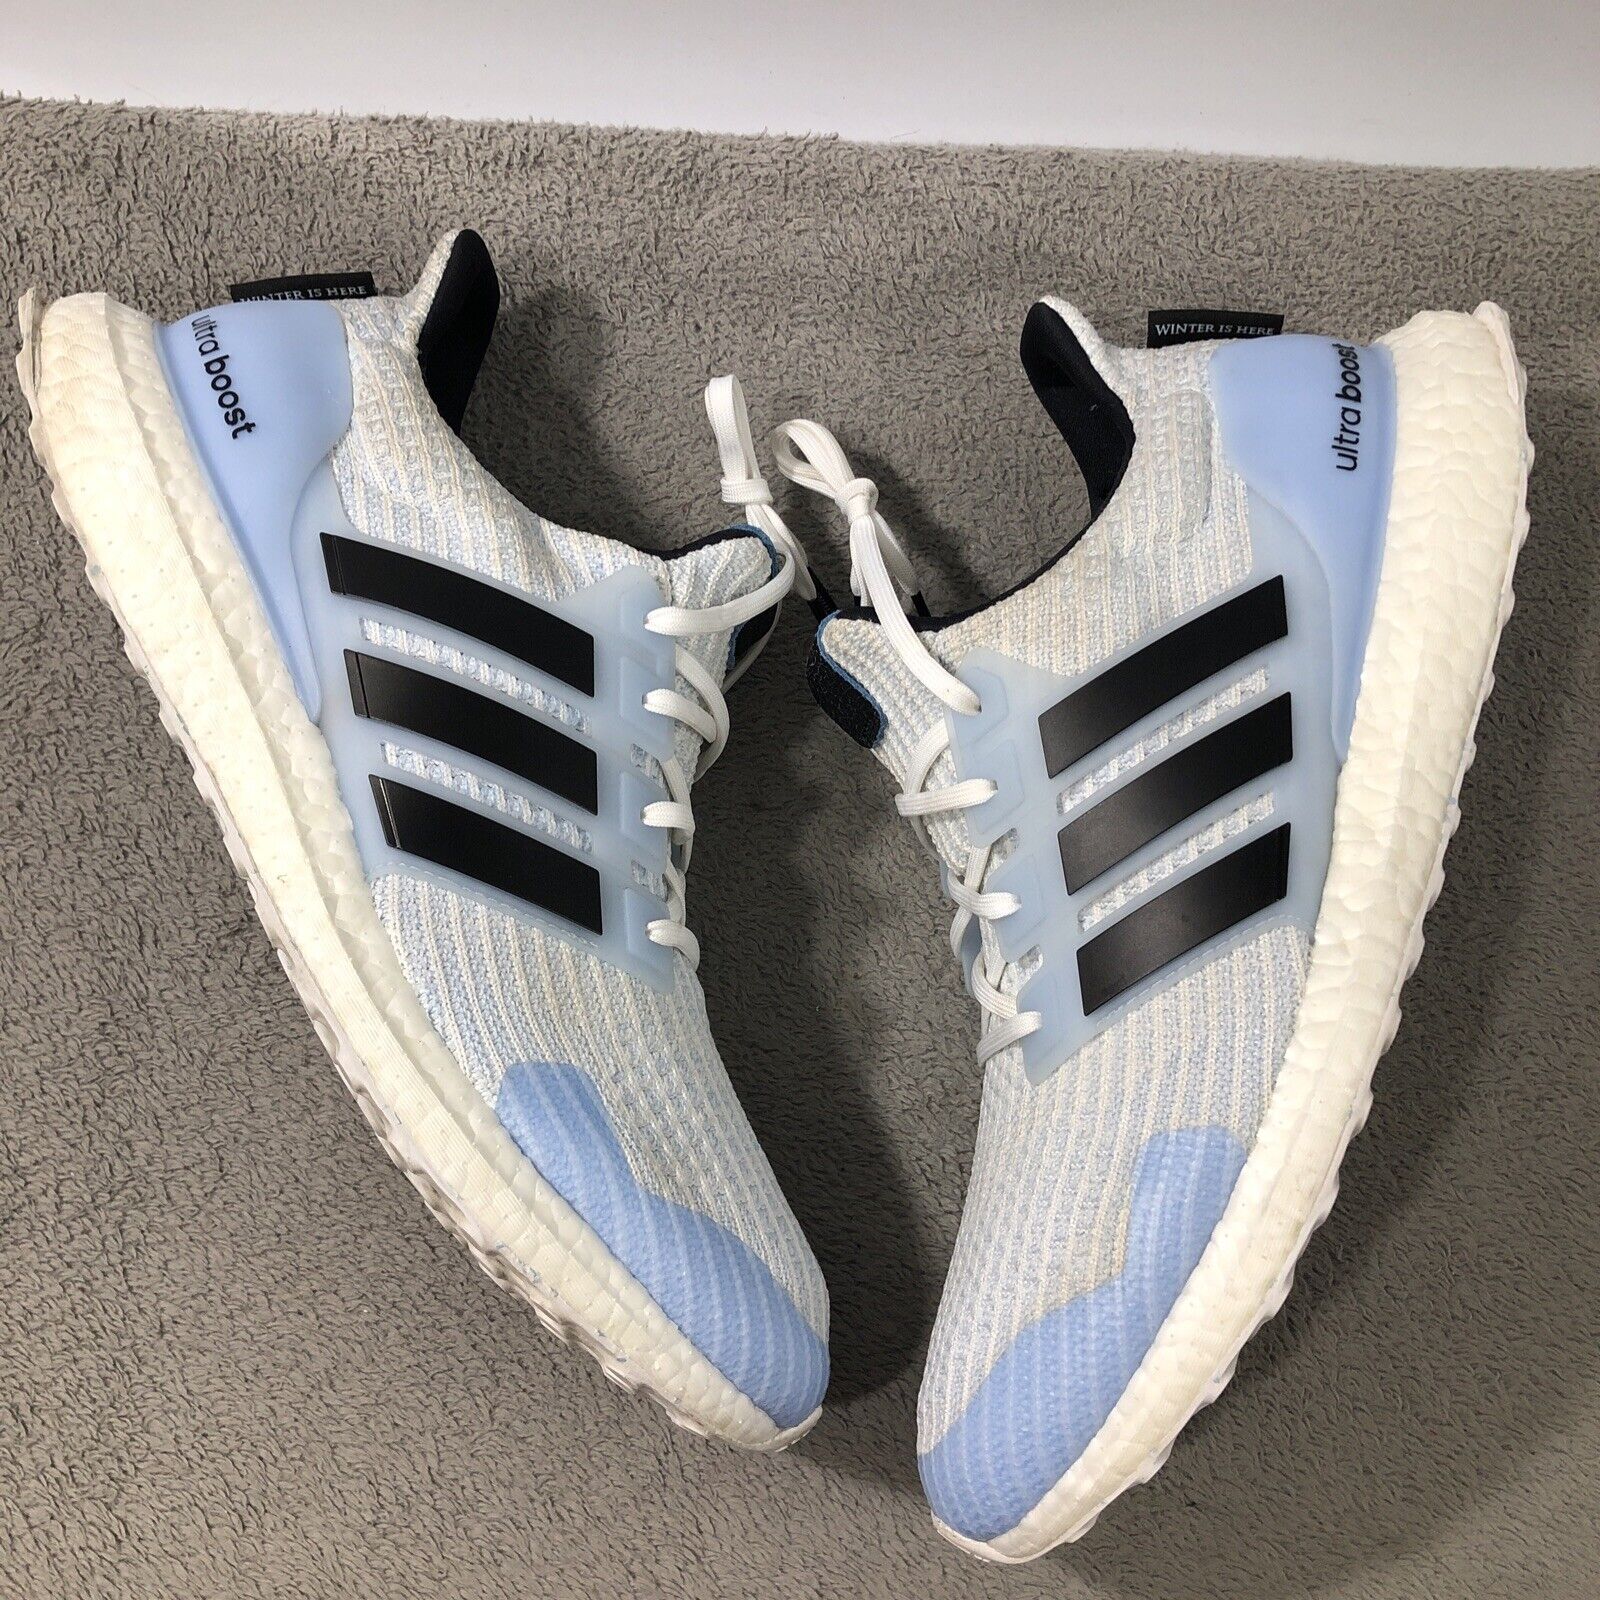 Adidas Ultra Boost 4.0 of Thrones White Walkers - Size 13 - EE3708 | eBay